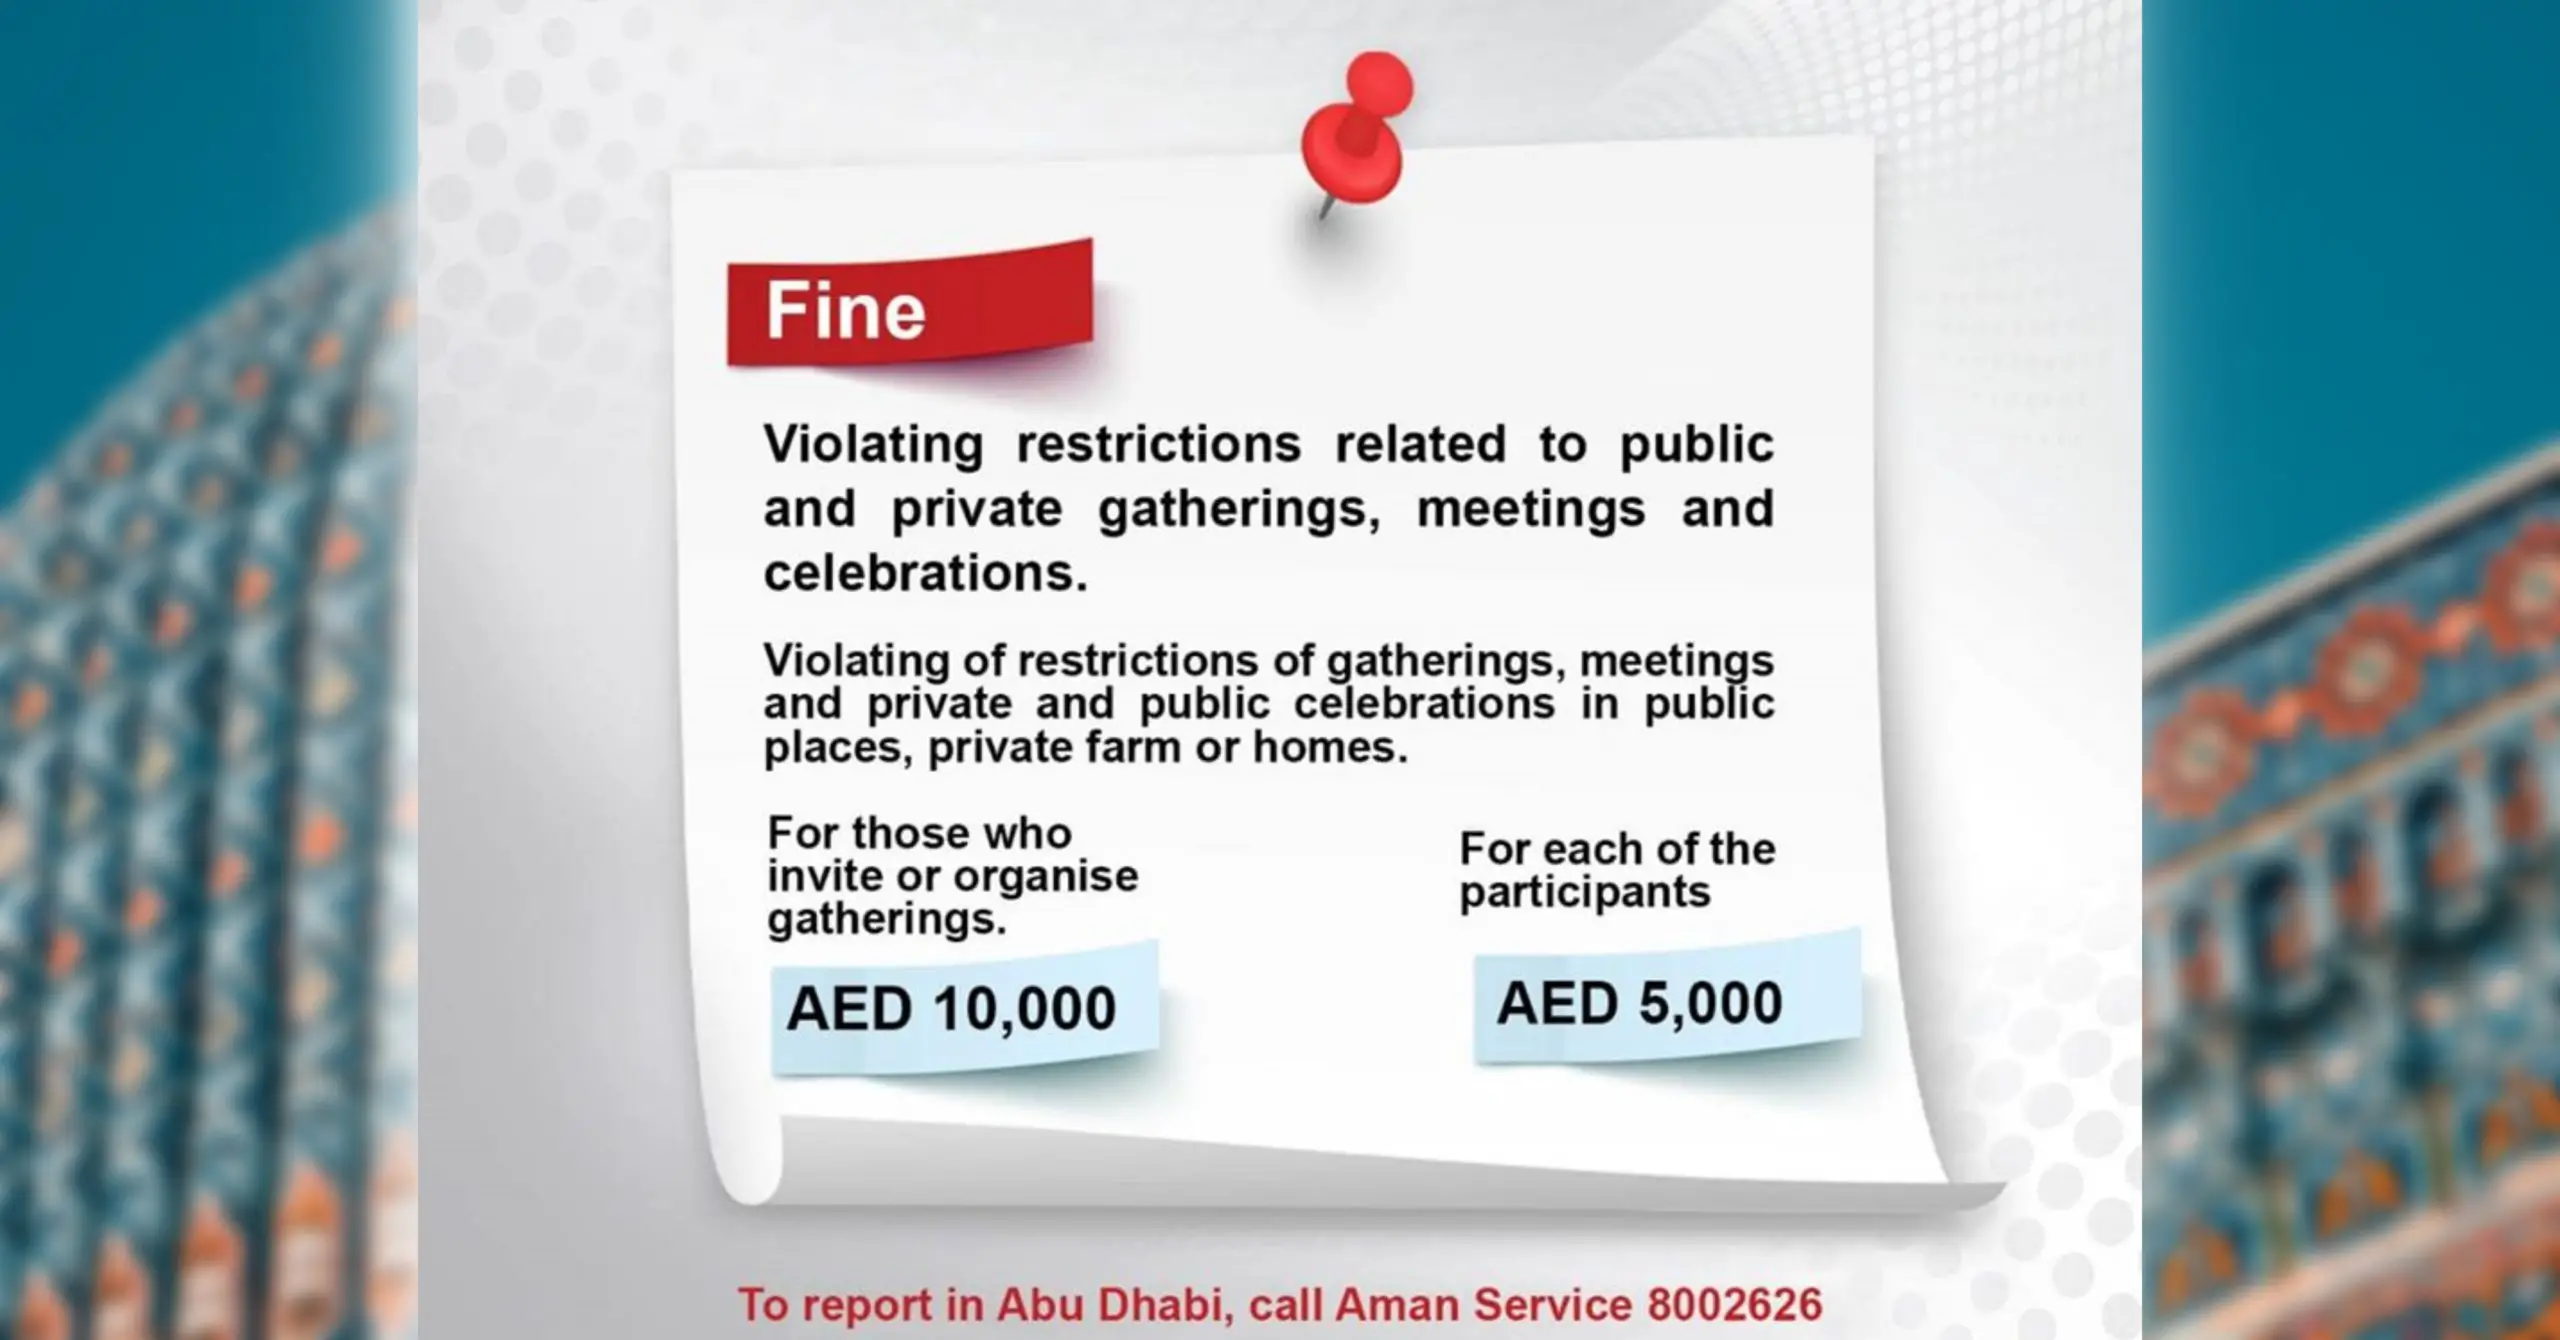 Beware: Up to AED 15,000 Fines for Organizing Gatherings in UAE